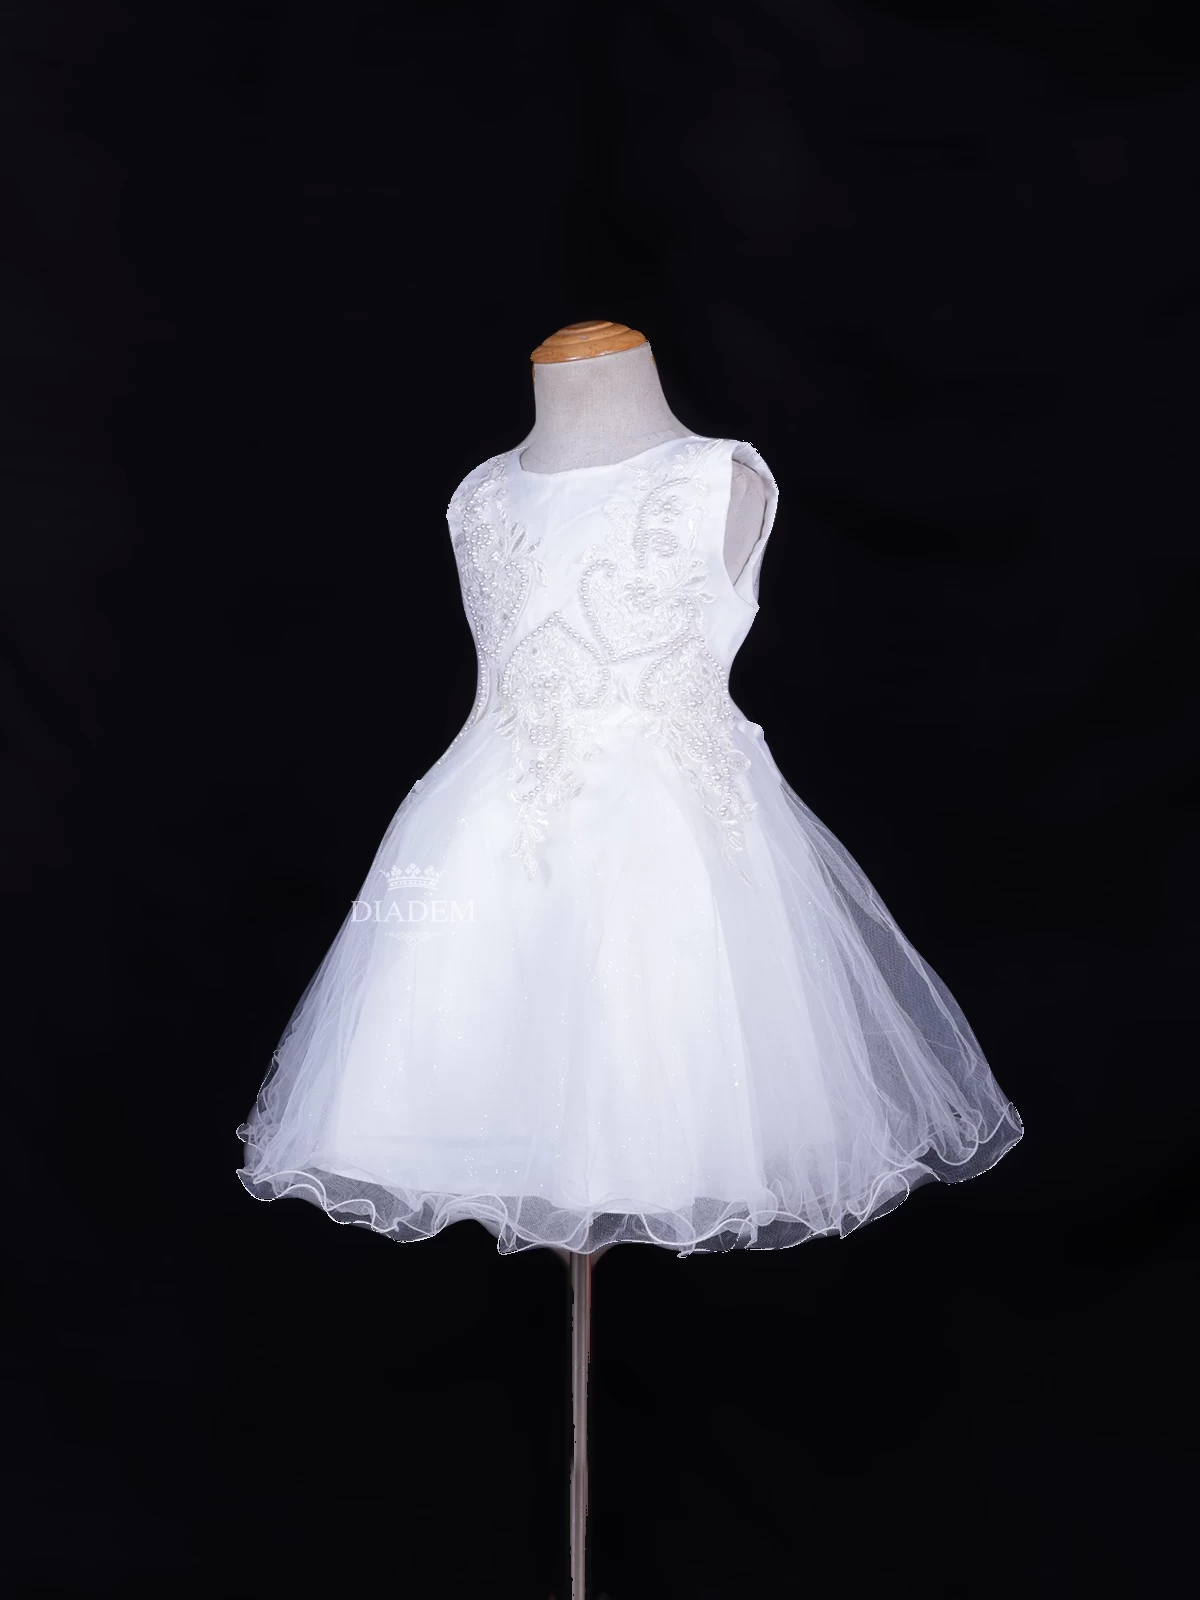 White Net Frock Embellished With Floral Laces And Pearl Beads